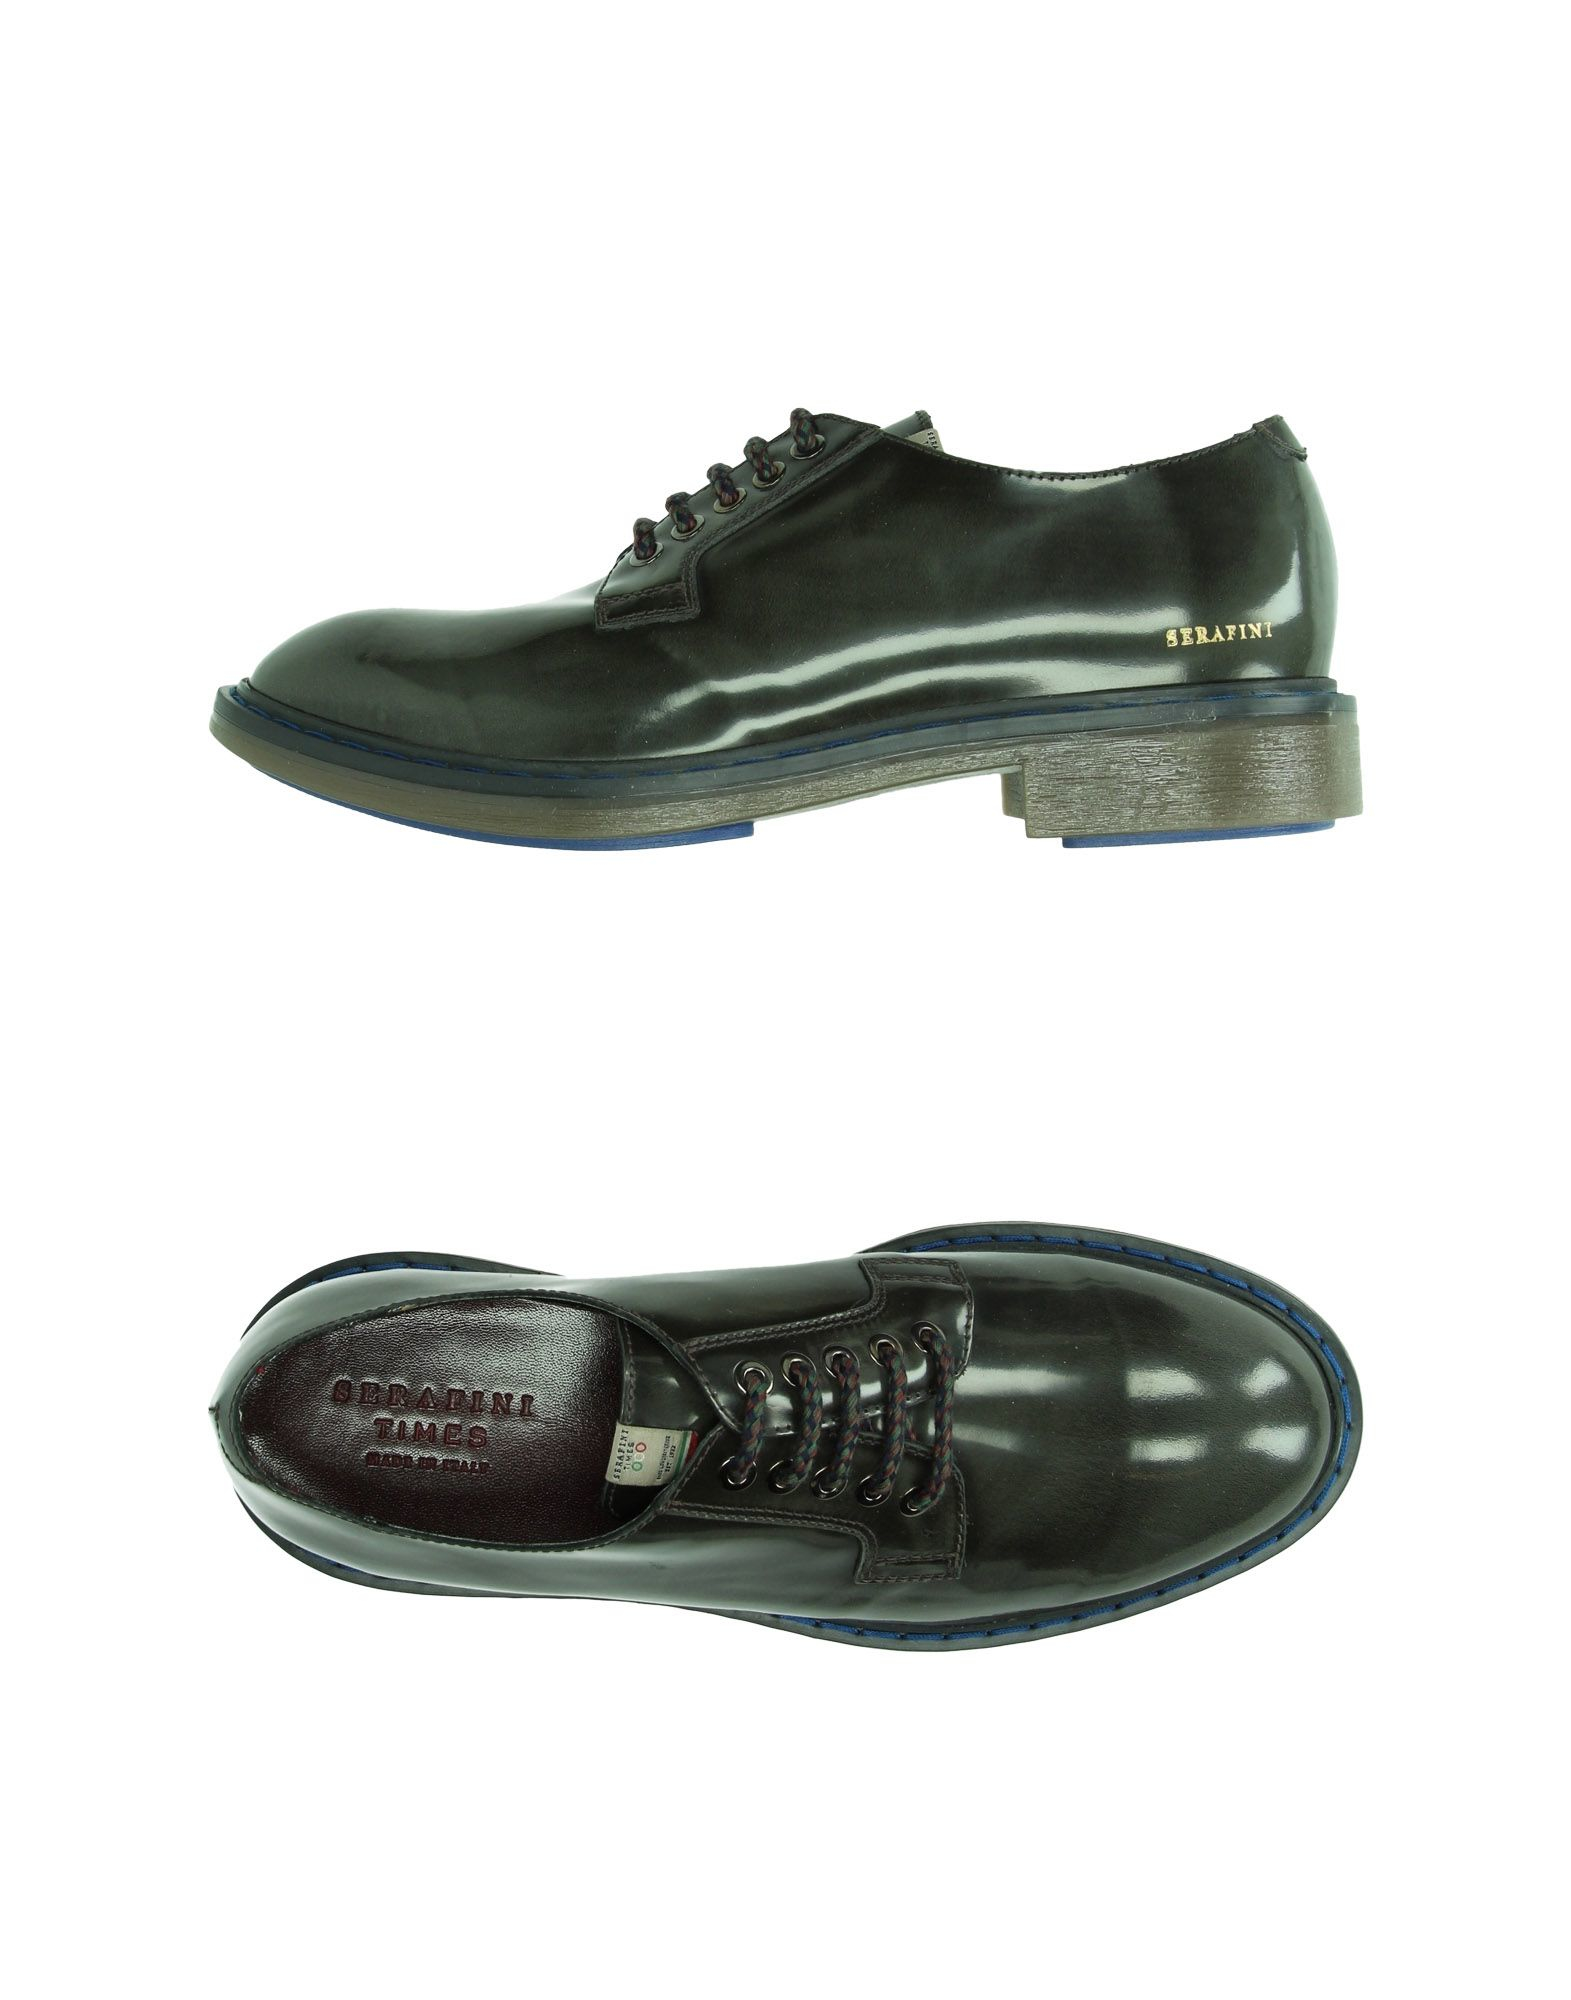 serafini times lead lace up shoes gray product 0 632945280 normal